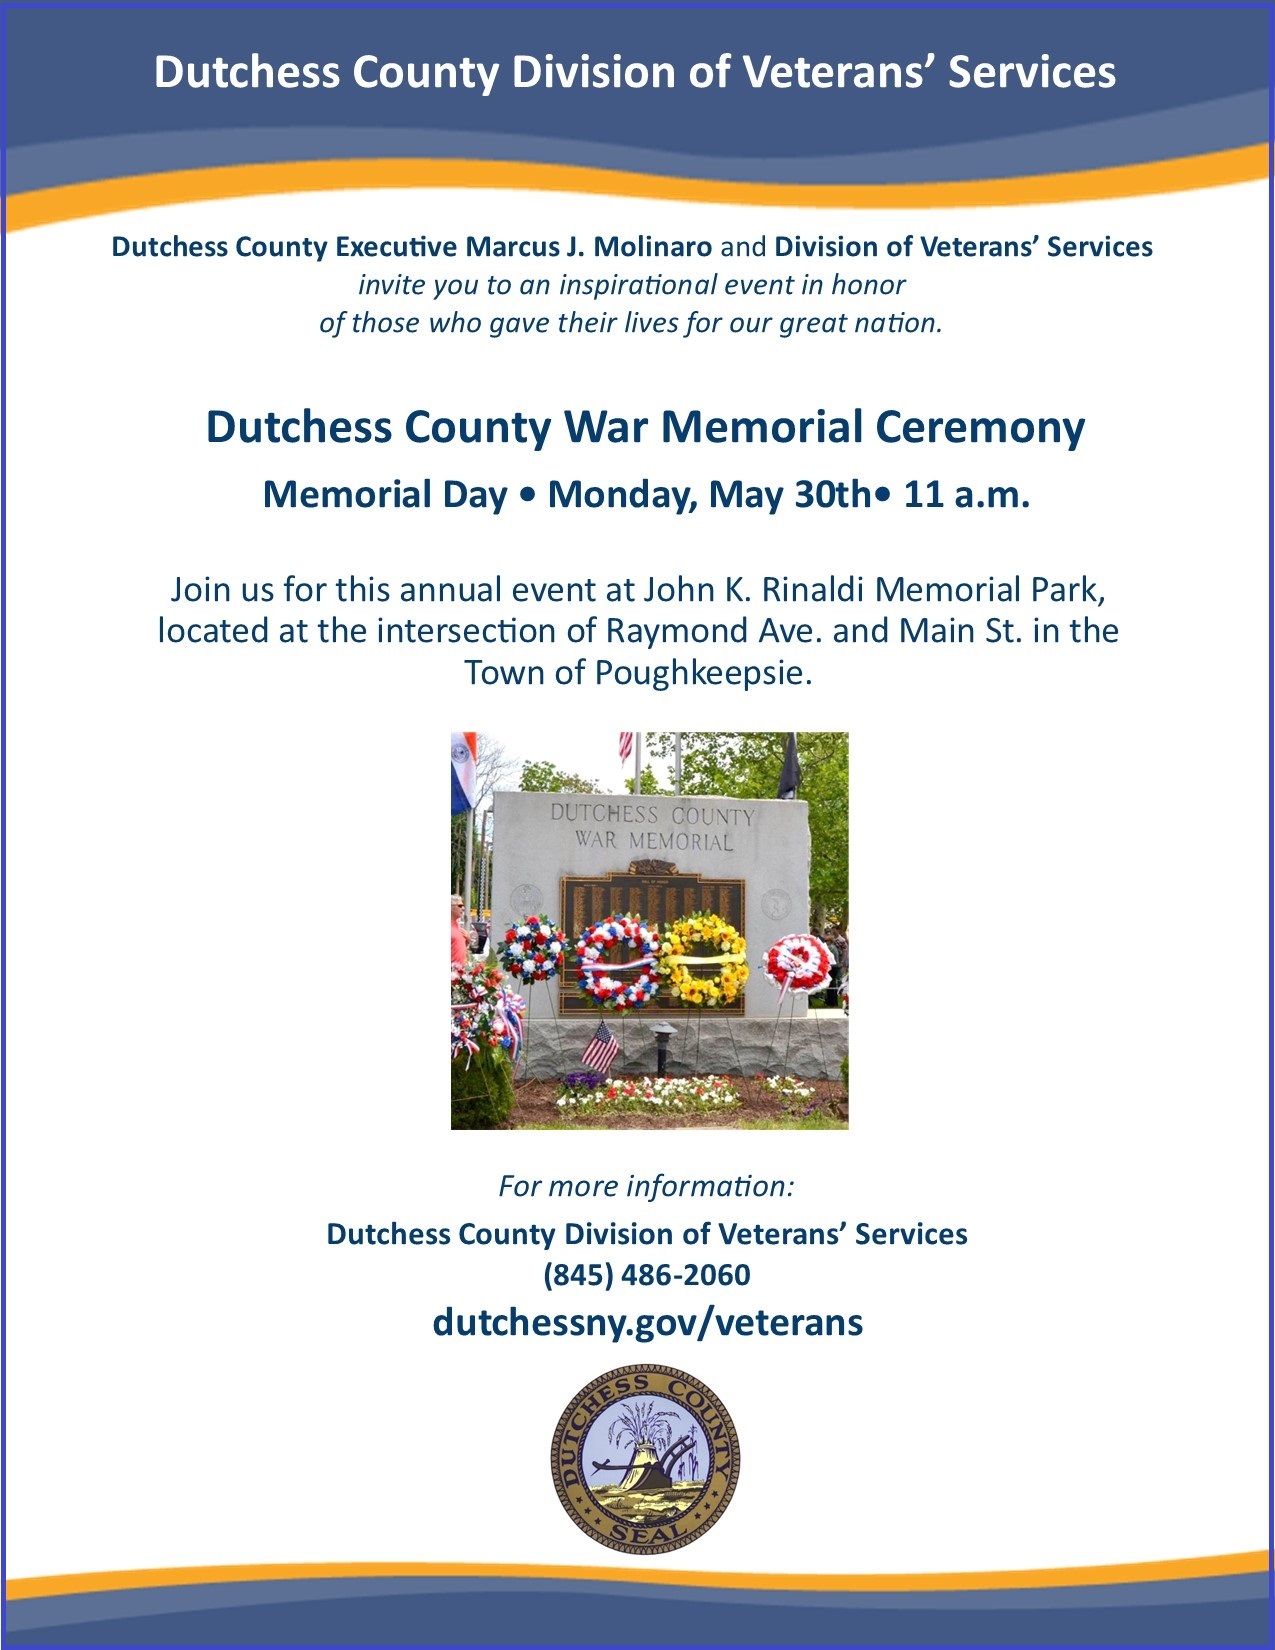 Dutchess County to Host Memorial Day Ceremony on Monday, May 30th